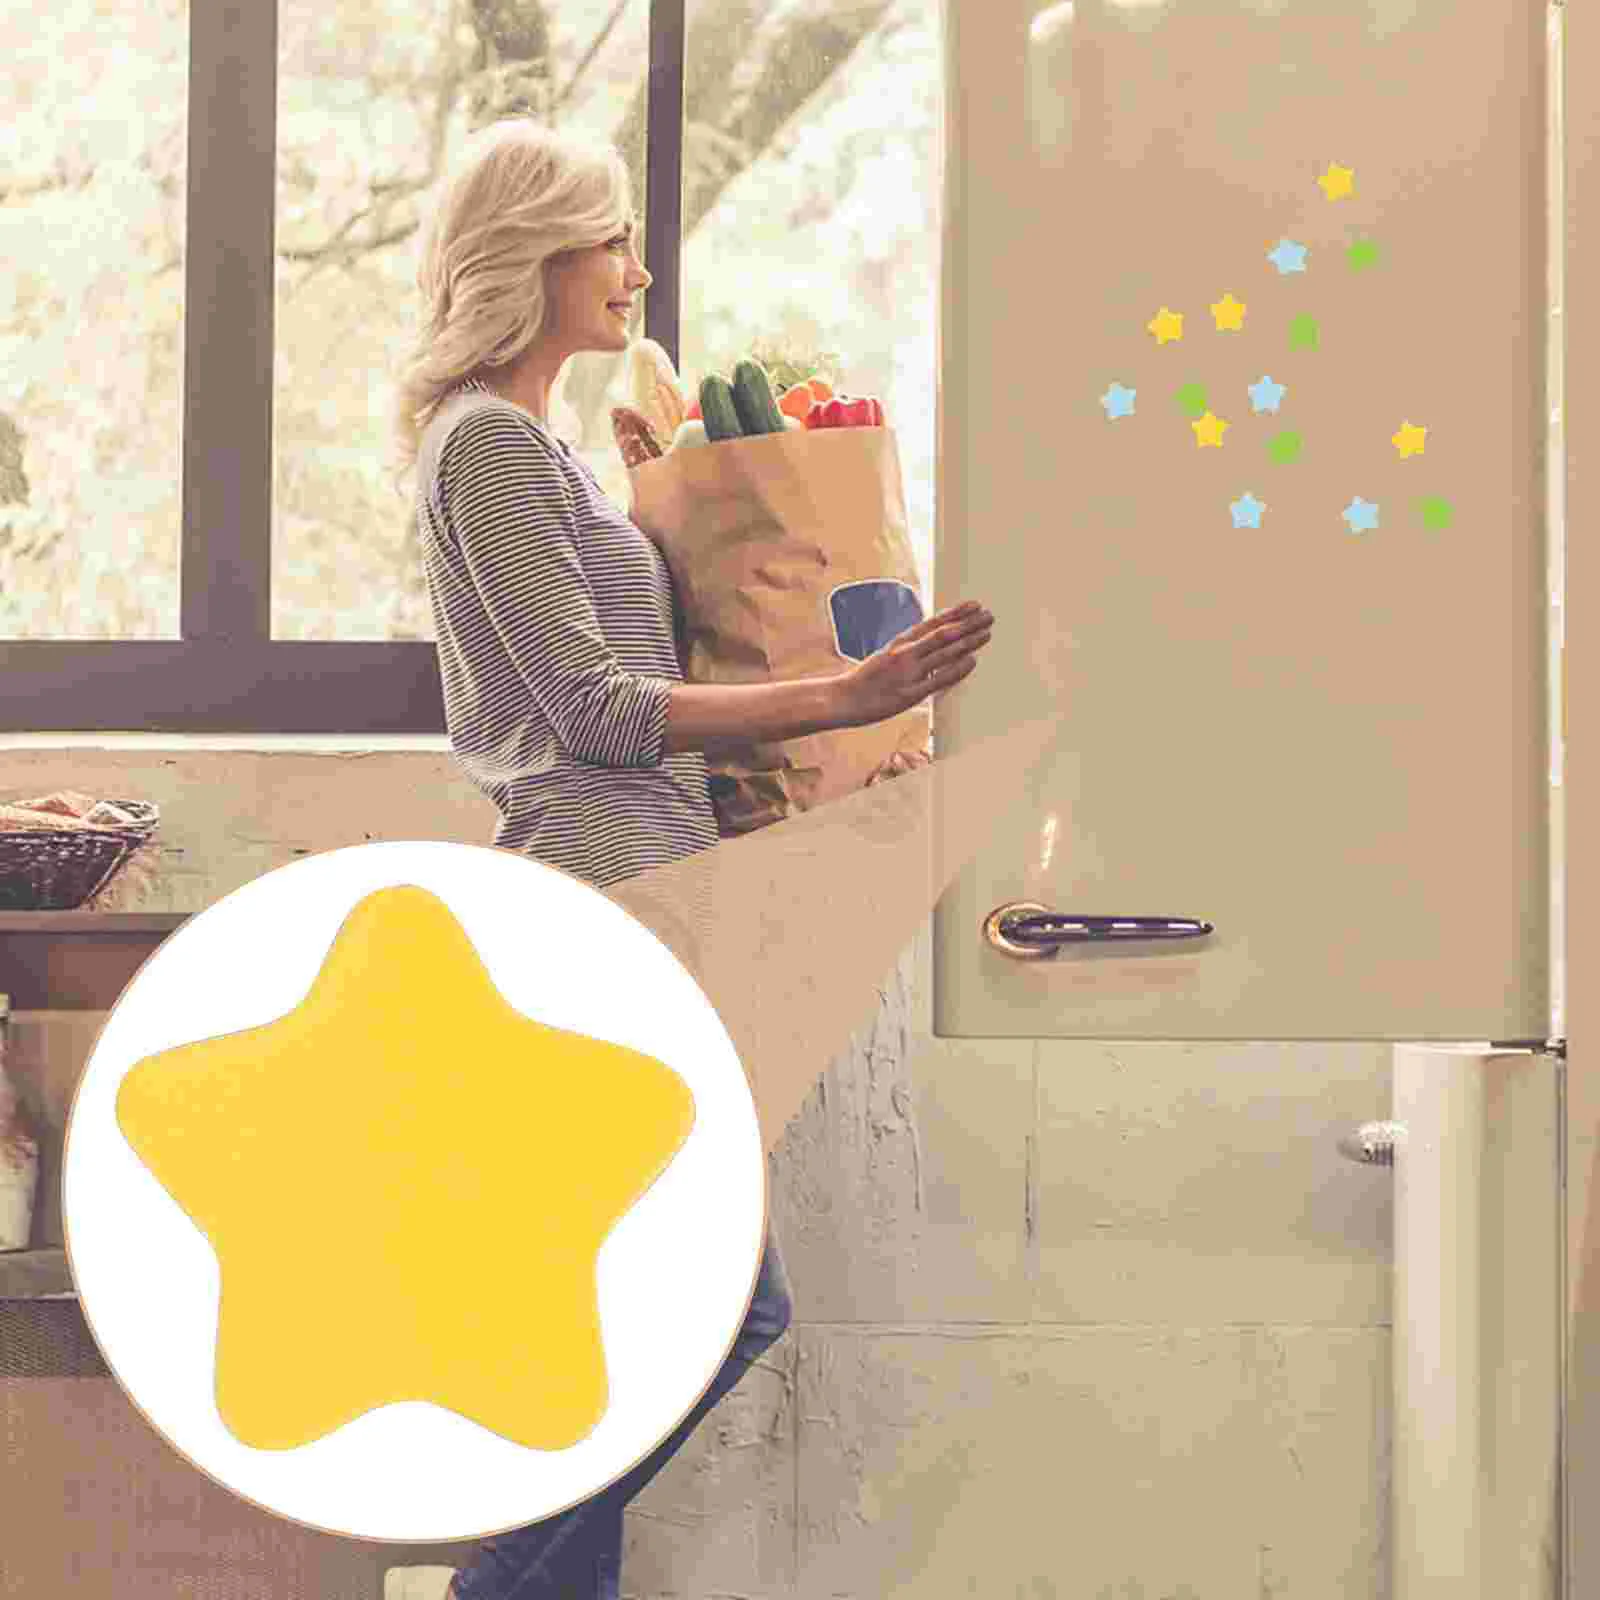 

120Pcs 2cm Stars Sticker Star Stickers Assorted Bright Neon Colors Great for Teachers Classrooms Fridge magnetic Magnets